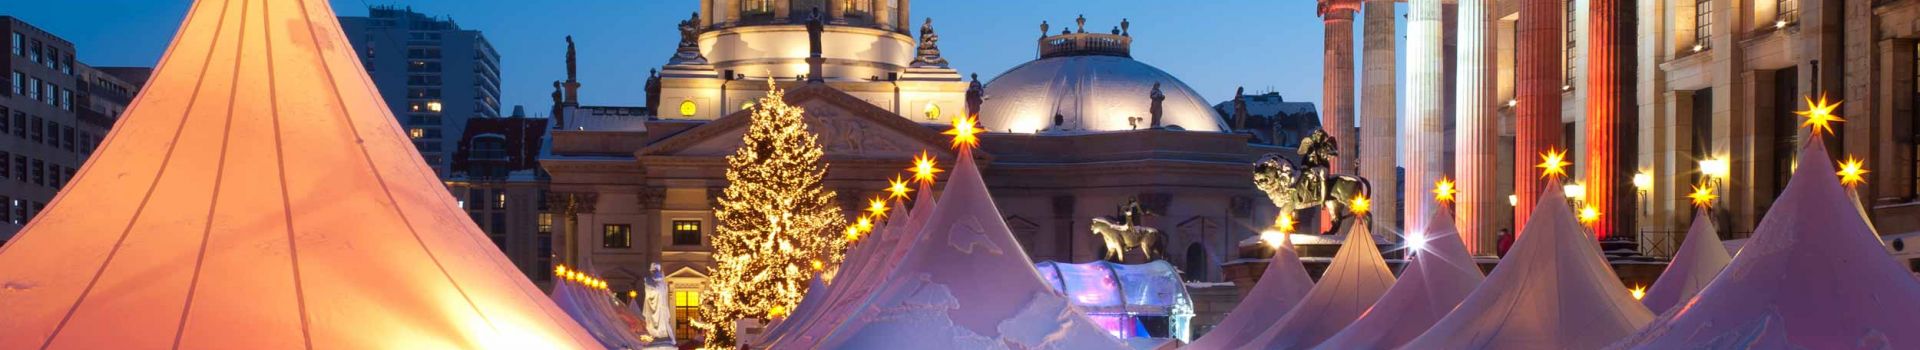 Cassidy Travel - Best Christmas Markets in Europe